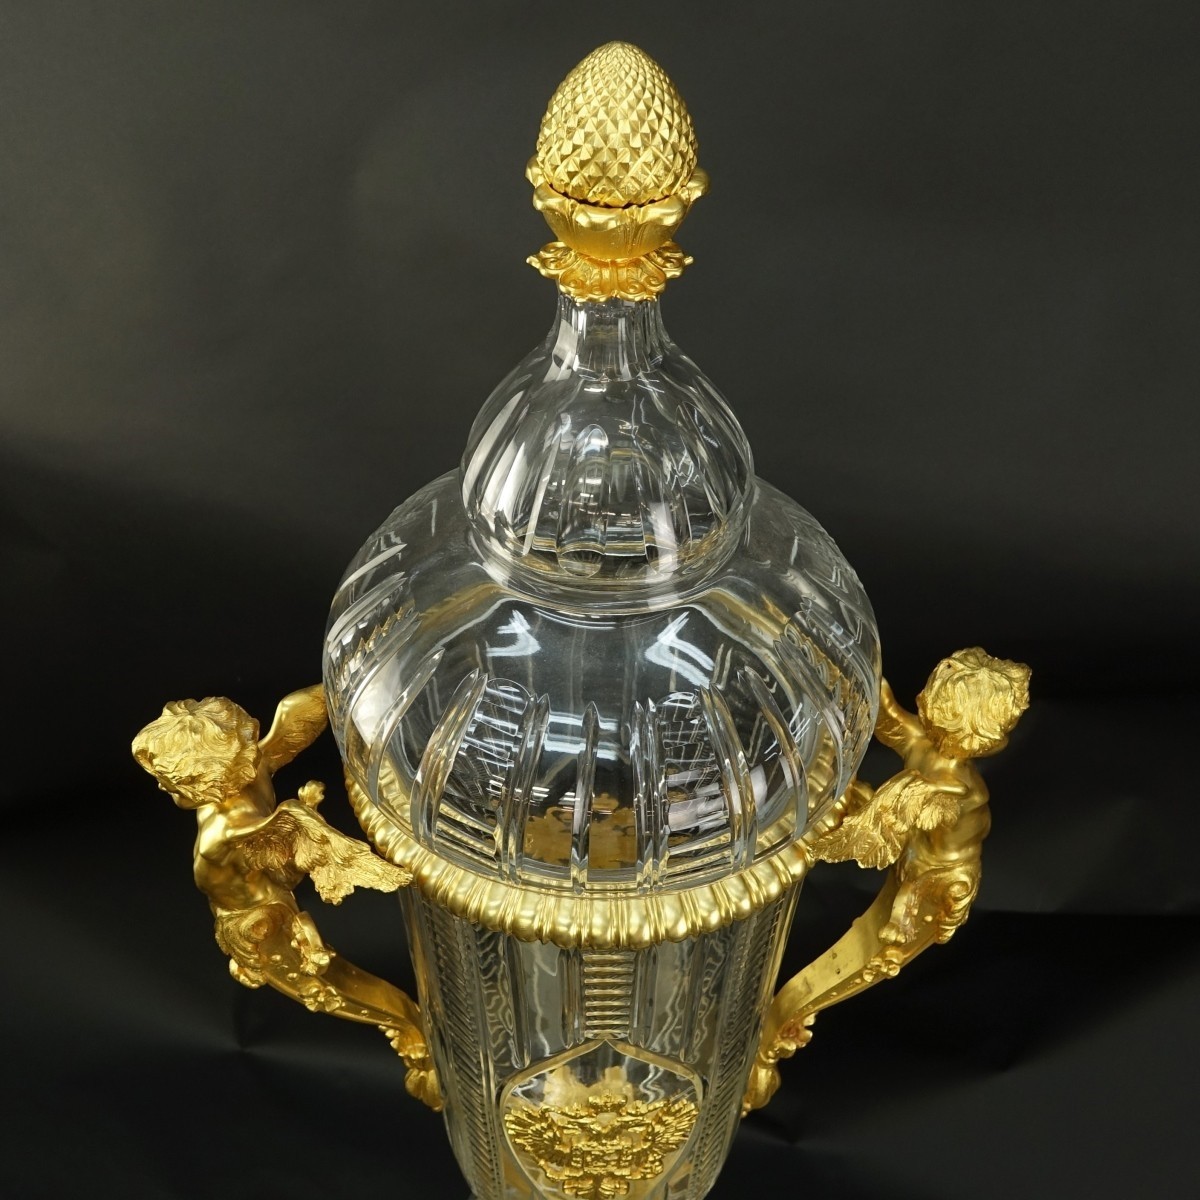 Large Russian Crystal and Bronze Urn